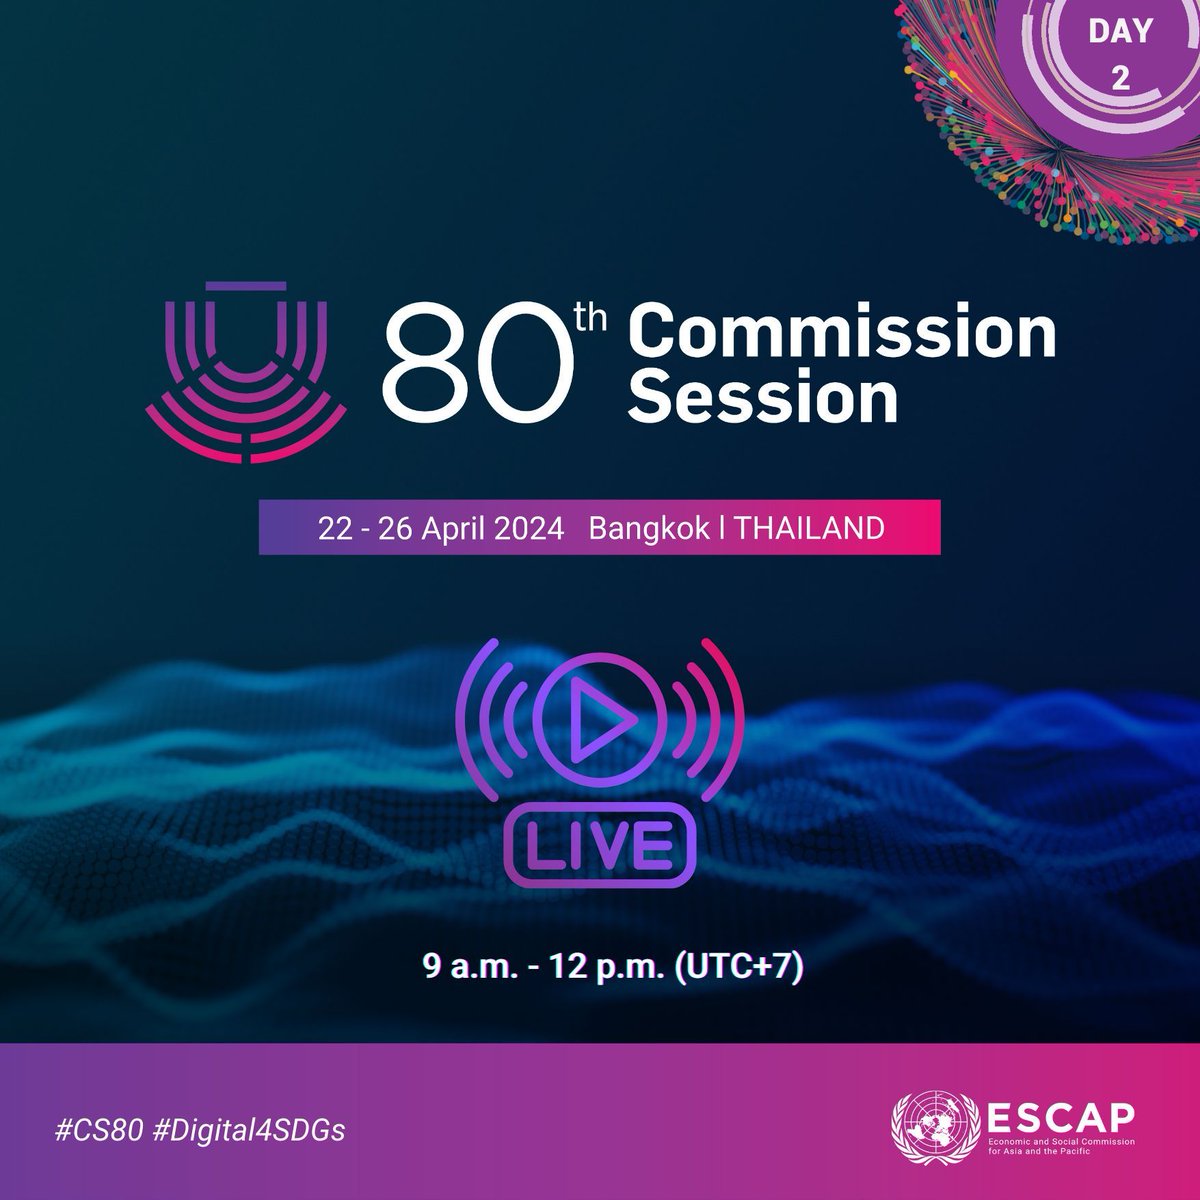 Don't miss out on the day 2️⃣ of #CS80! 💫 

Engage with the livestream and delve into the transformative effect of #DigitalTransformation on: 

♻️ Energy
🏥 Healthcare 
💼 Employment 
🌏 Climate Action 
... 
 
Join @UNWebTV live: buff.ly/49Ih2JO

#Digital4SDGs